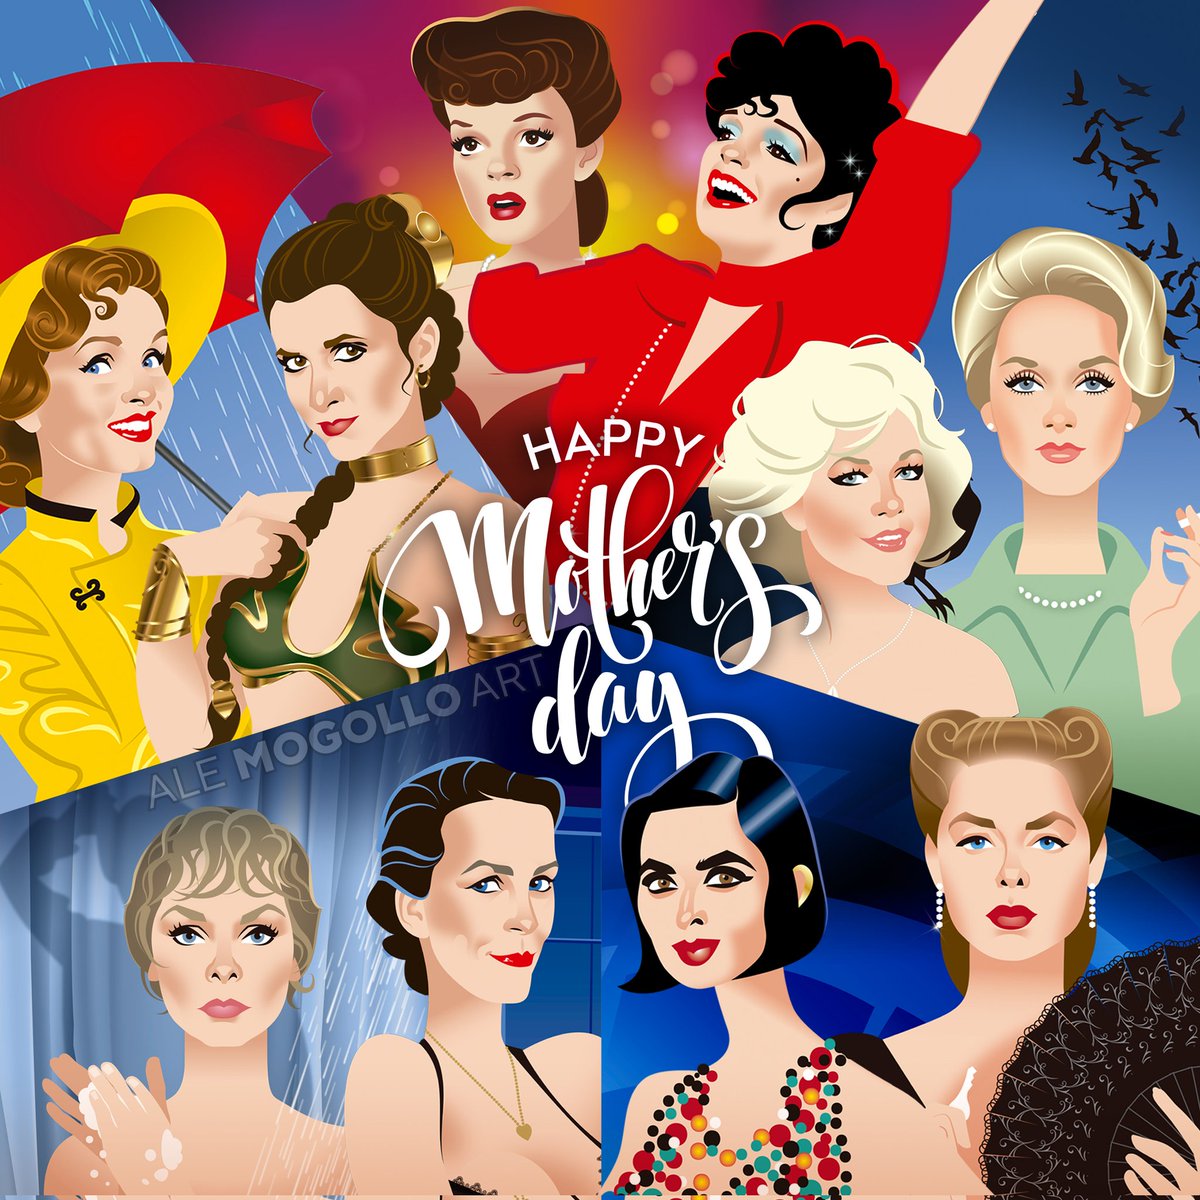 Showbiz moms and daughters ❤️ Happy Mother’s Day to all of you who celebrate today!
#debbiereynolds #carriefisher #isabellarossellini #ingridbergman #tippihedren #melaniegriffith #lizaminnelli #judygarland #janetleigh #jamieleecurtis #mothersday #happymothersday #alejandromogollo